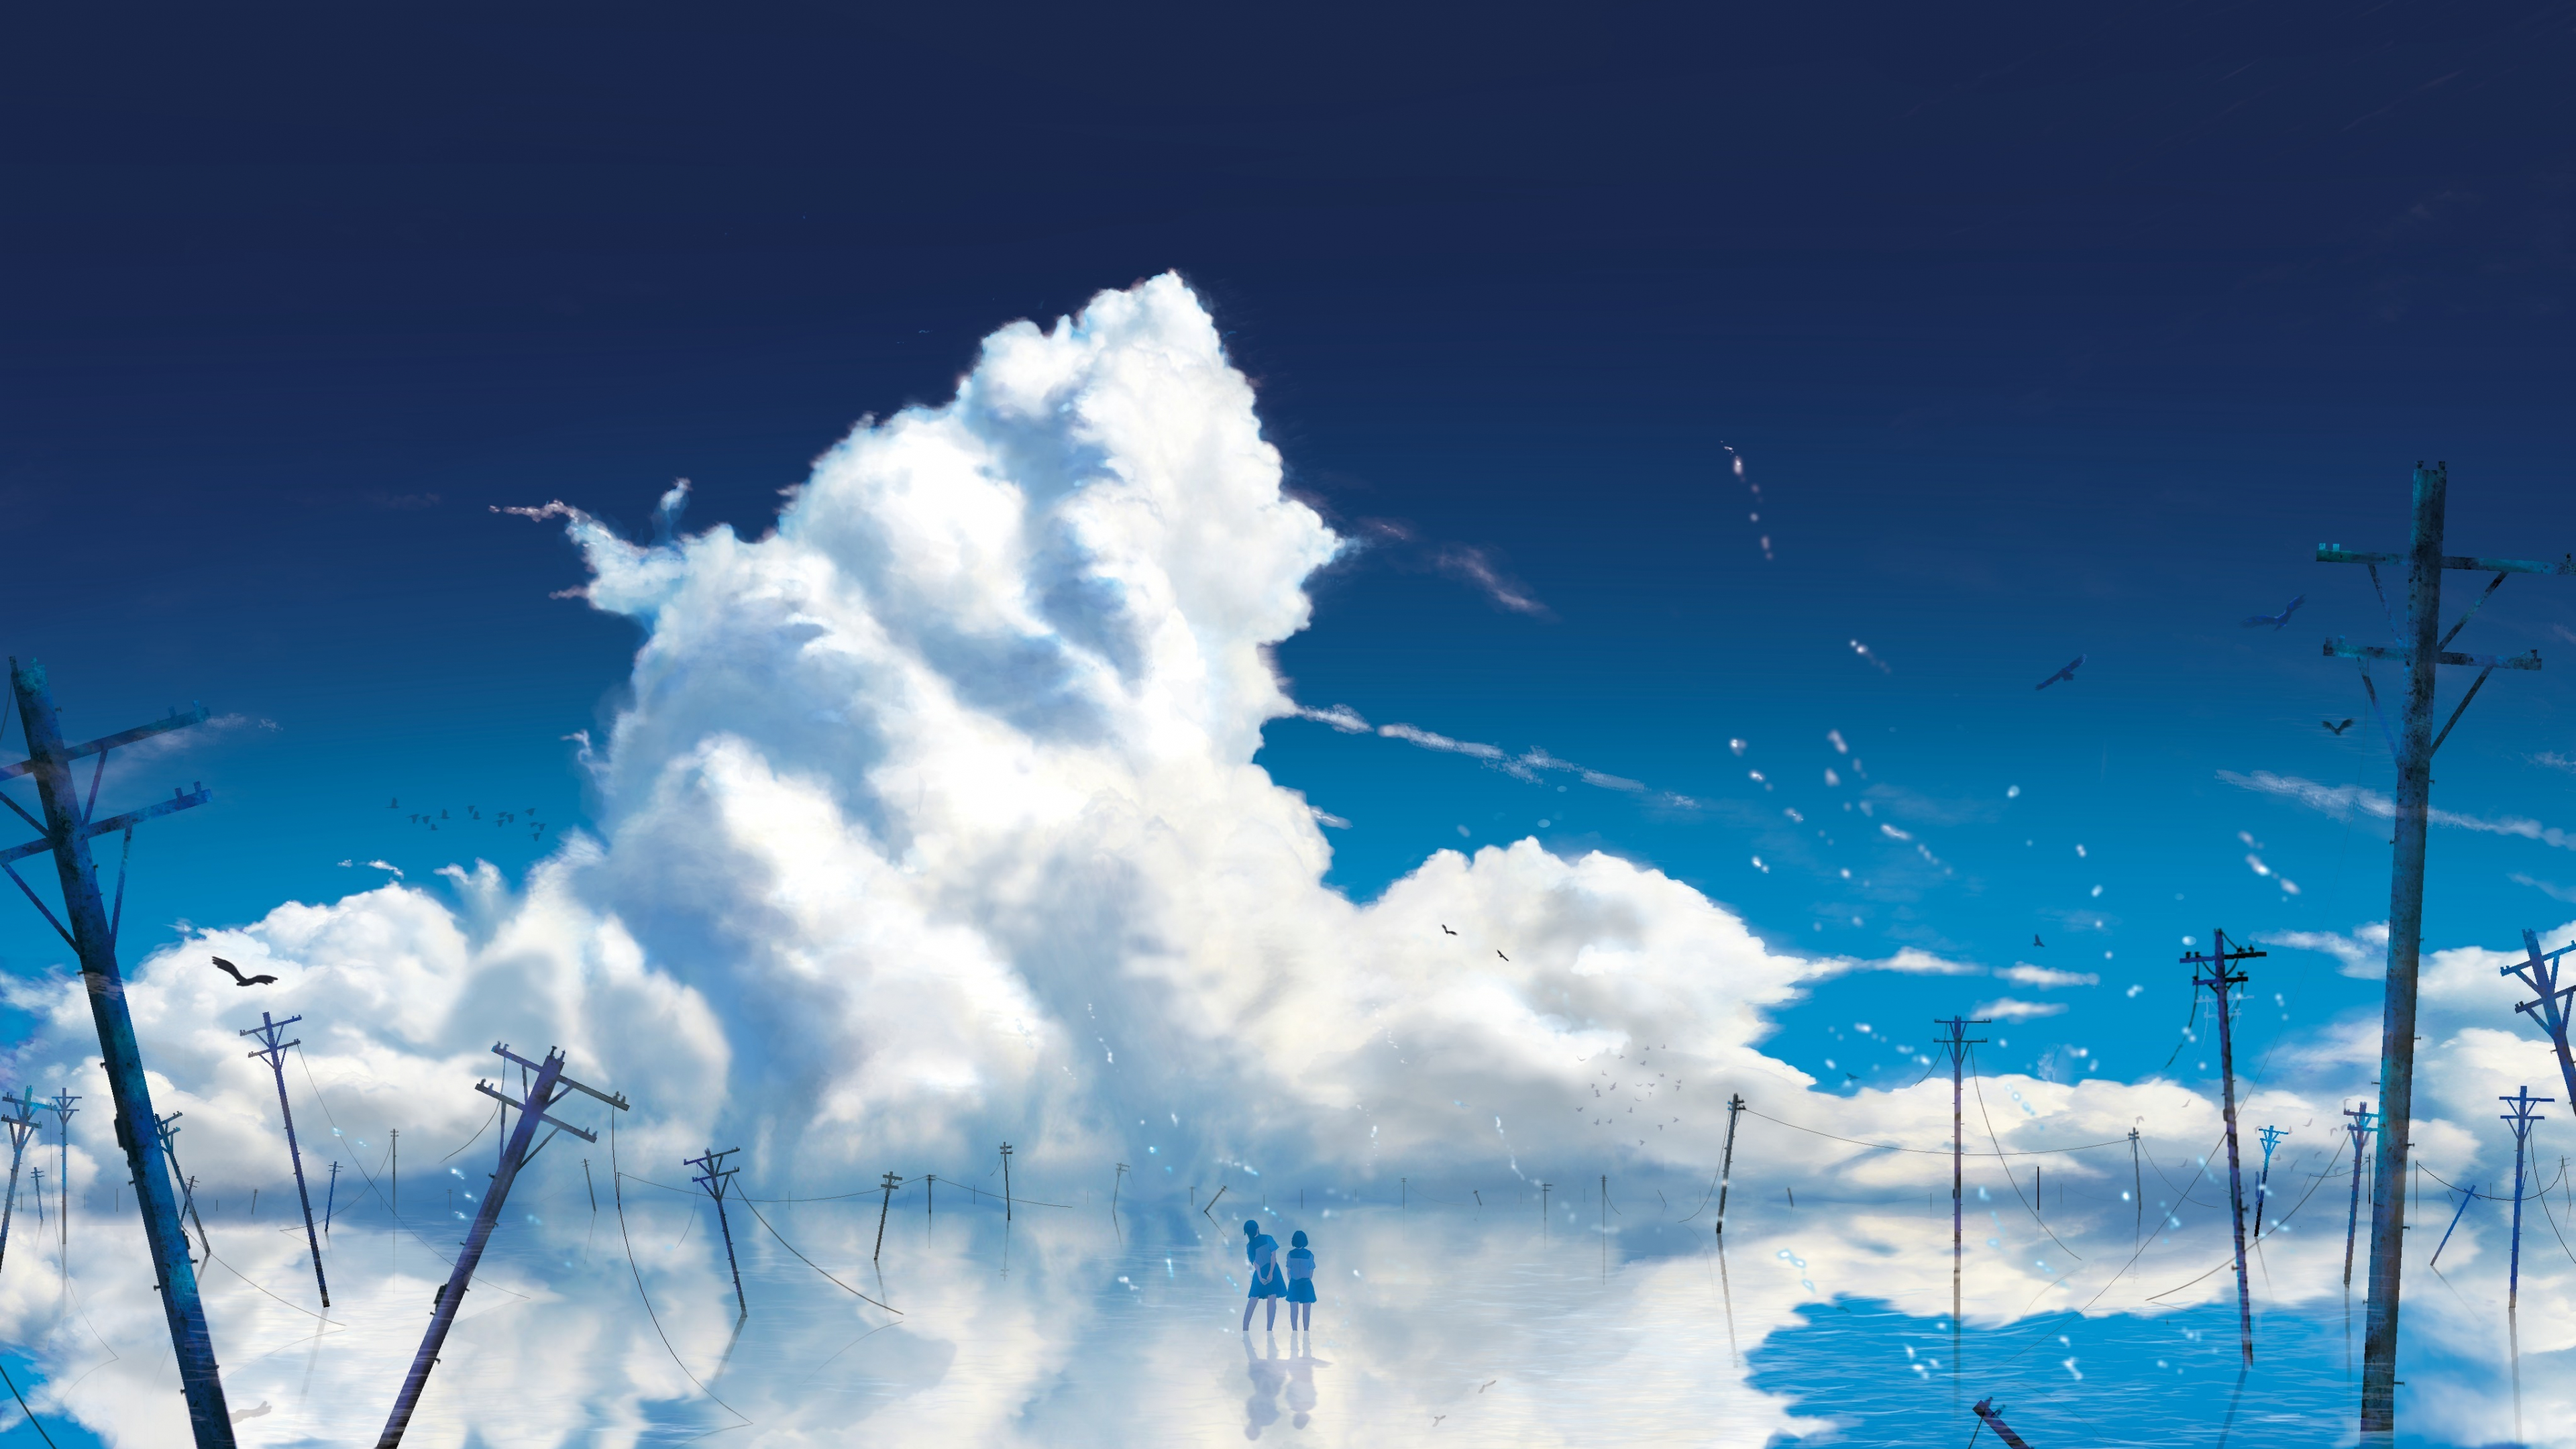 Download 3840x2160 wallpaper anime girls, outdoor, clouds ...